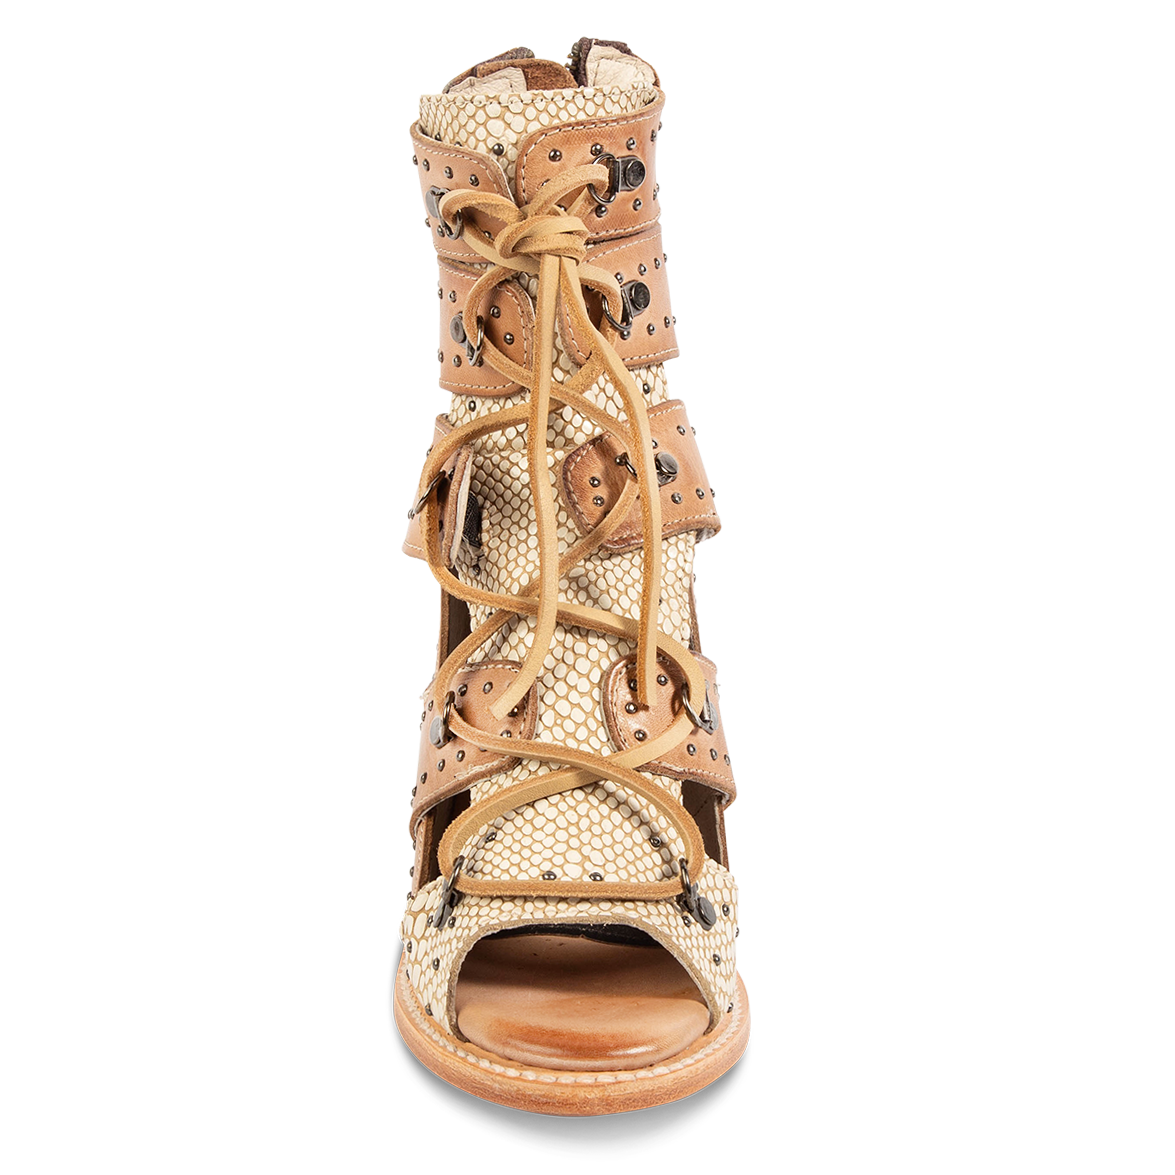 Front view showing leather criss cross lacing, an open toe construction and stud embellishments on FREEBIRD women's Brandy white snake embossed leather sandal